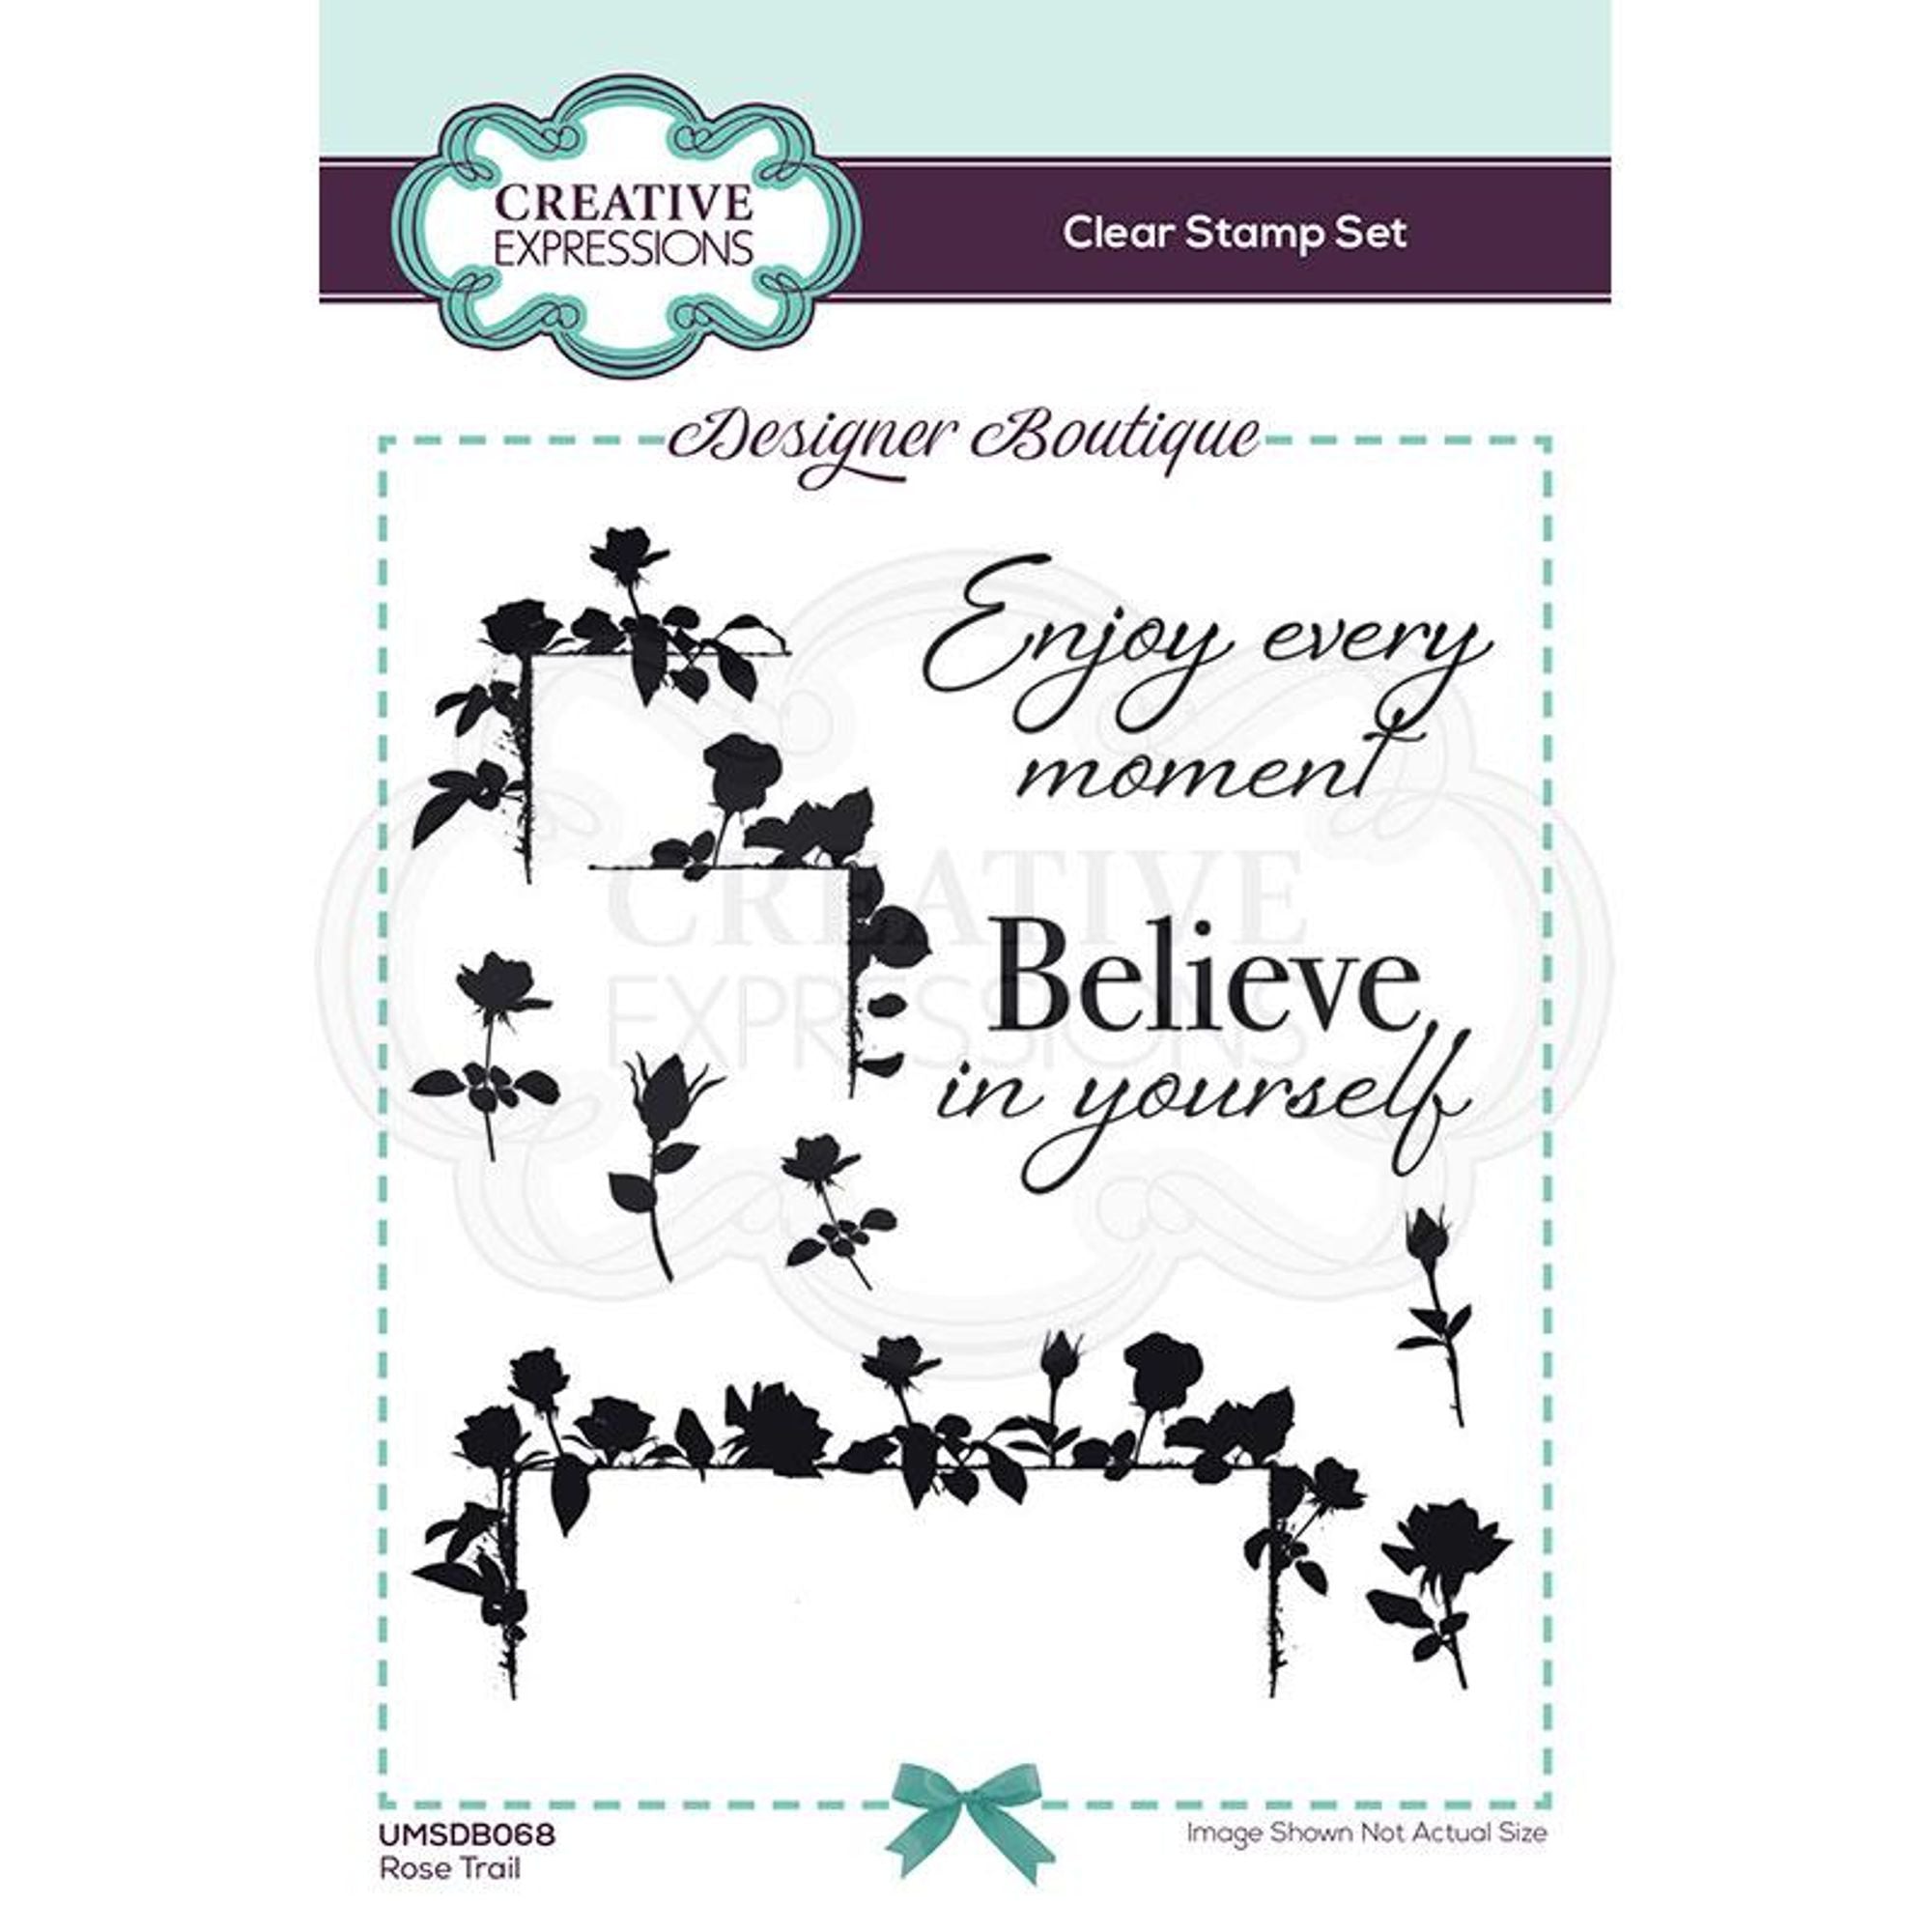 Creative Expressions Designer Boutique Collection Rose Trail A6 Clear Stamp Set